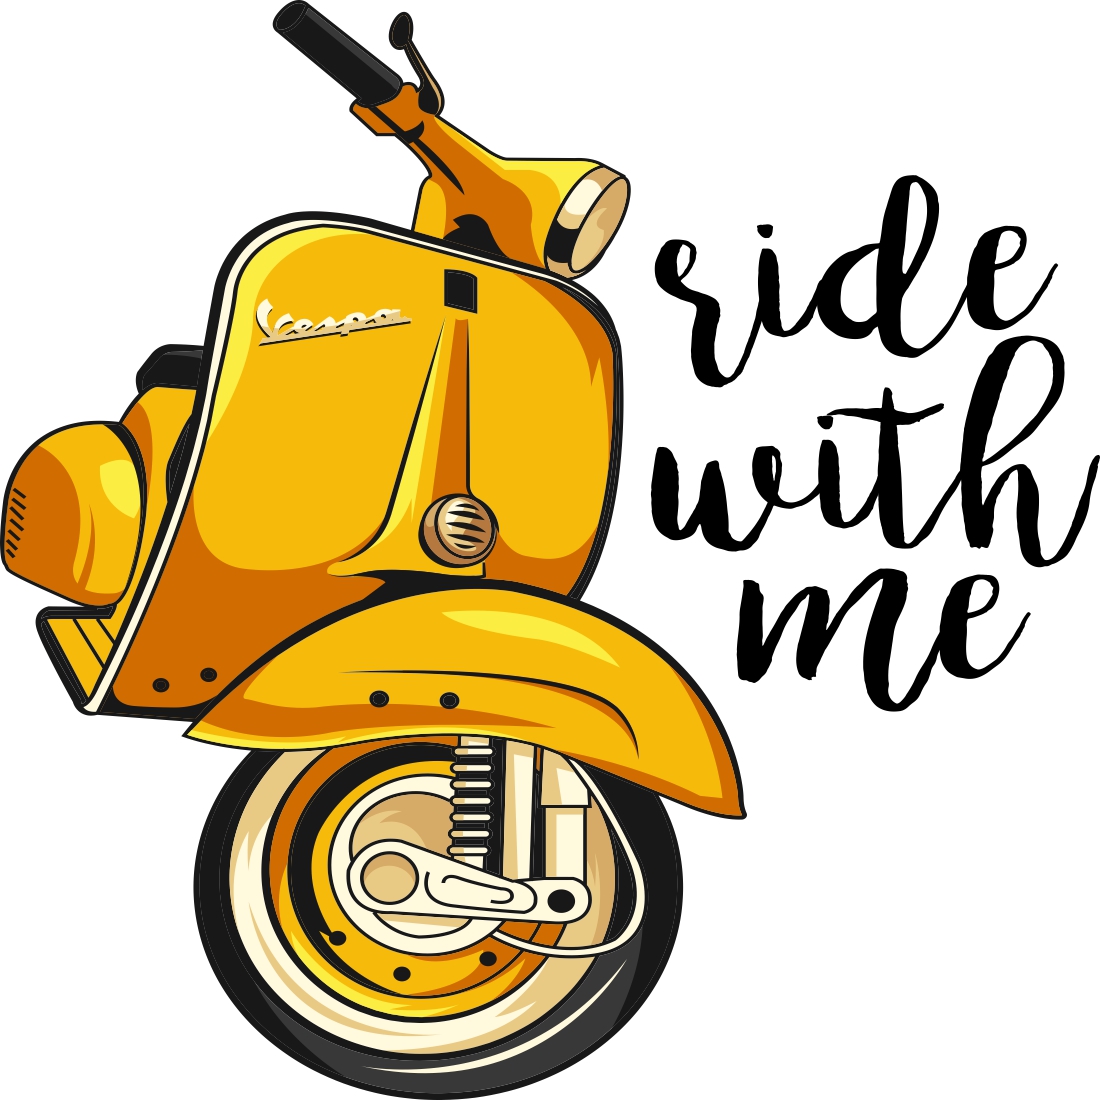 RIDE WITH ME LOGO cover image.